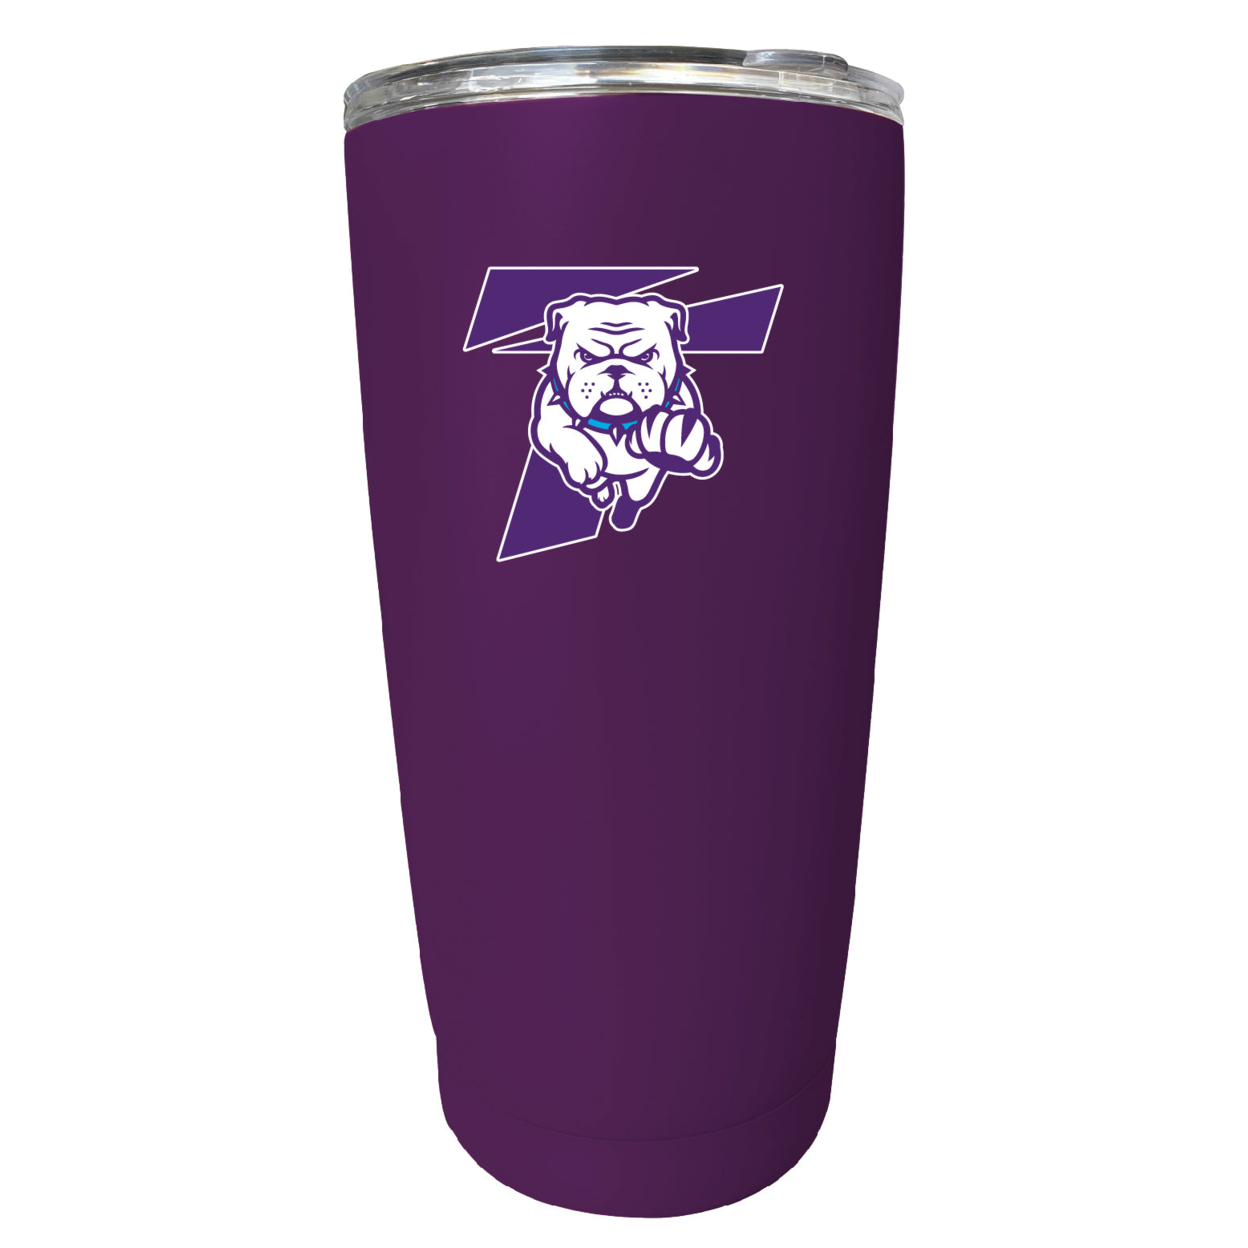 Truman State University 16 Oz Stainless Steel Insulated Tumbler - Pink